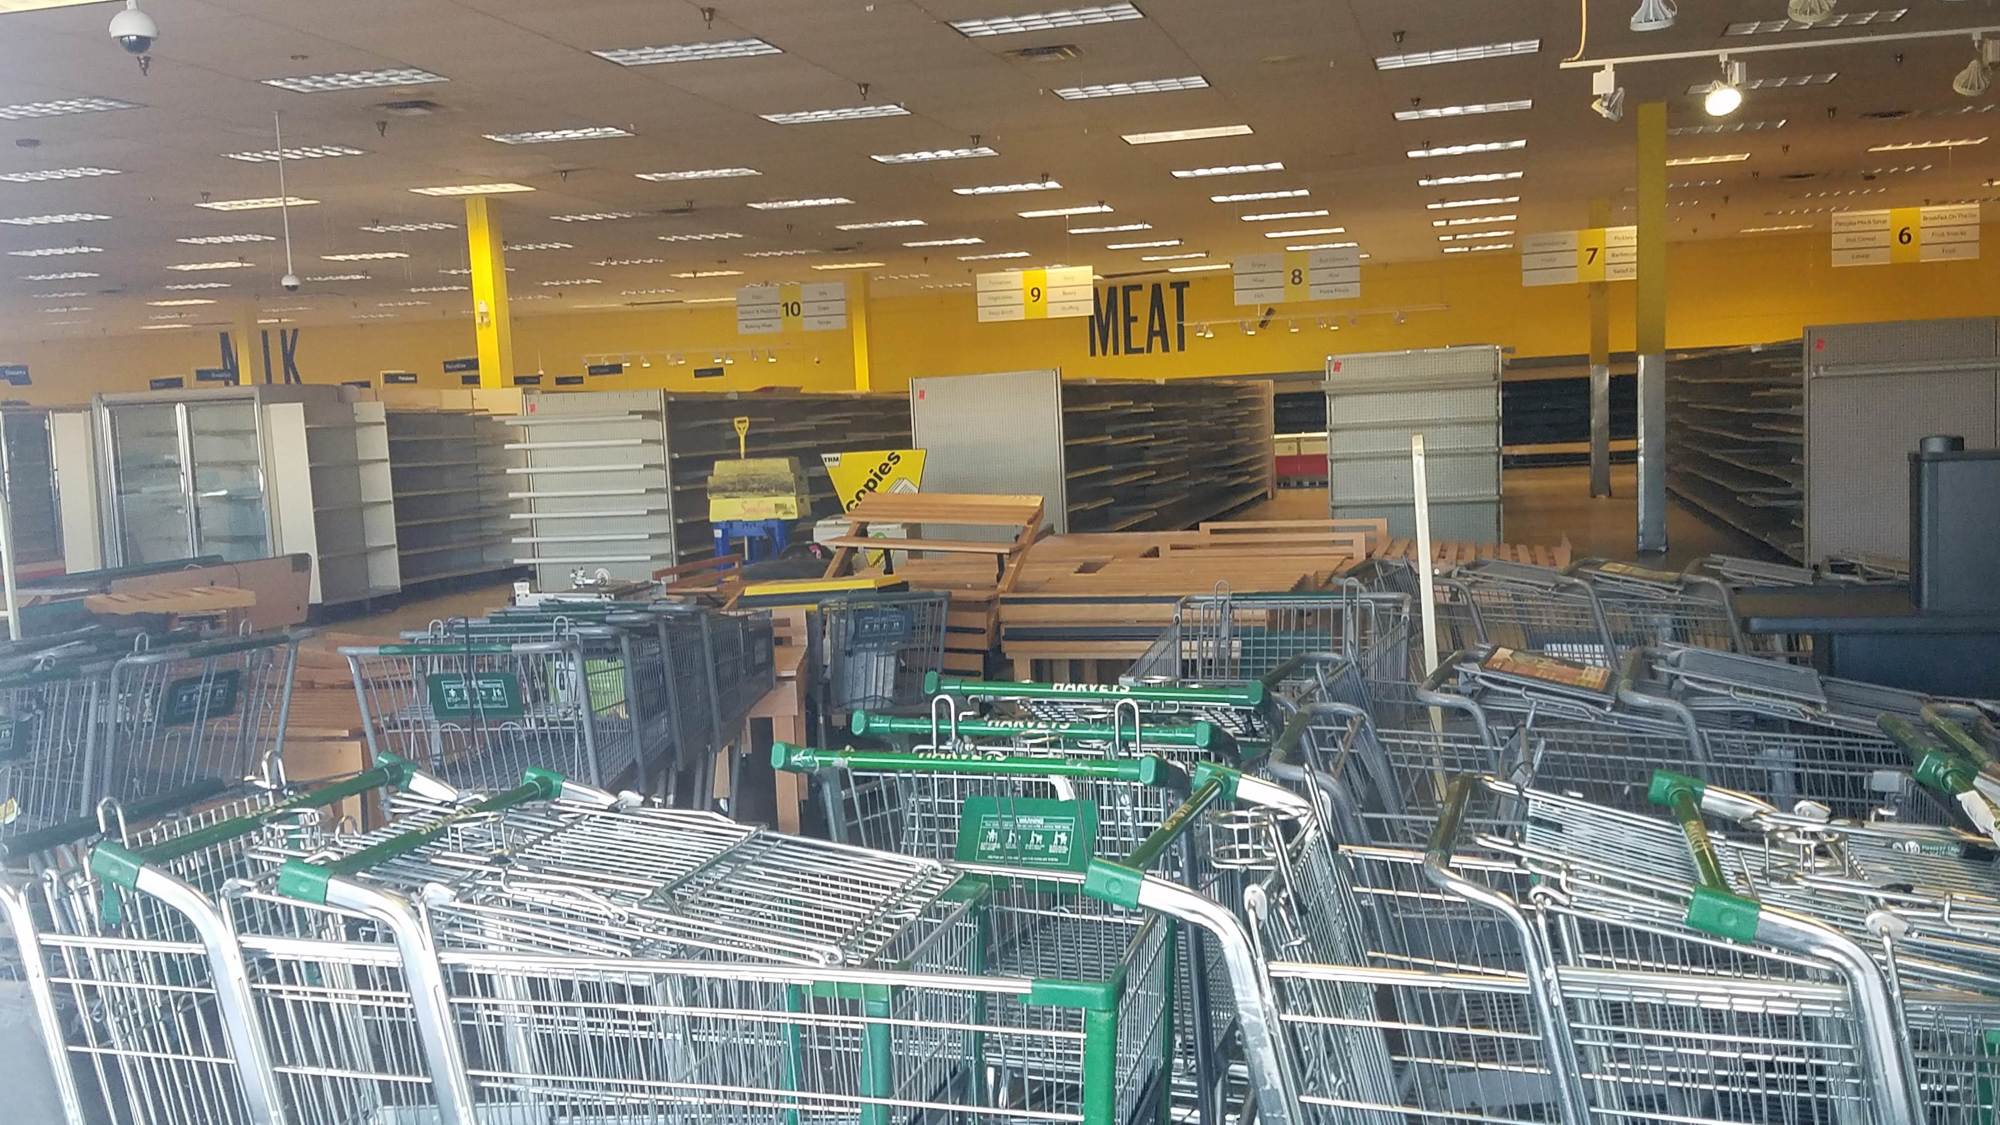 Shopping carts and shelves fill the former Harveys store.